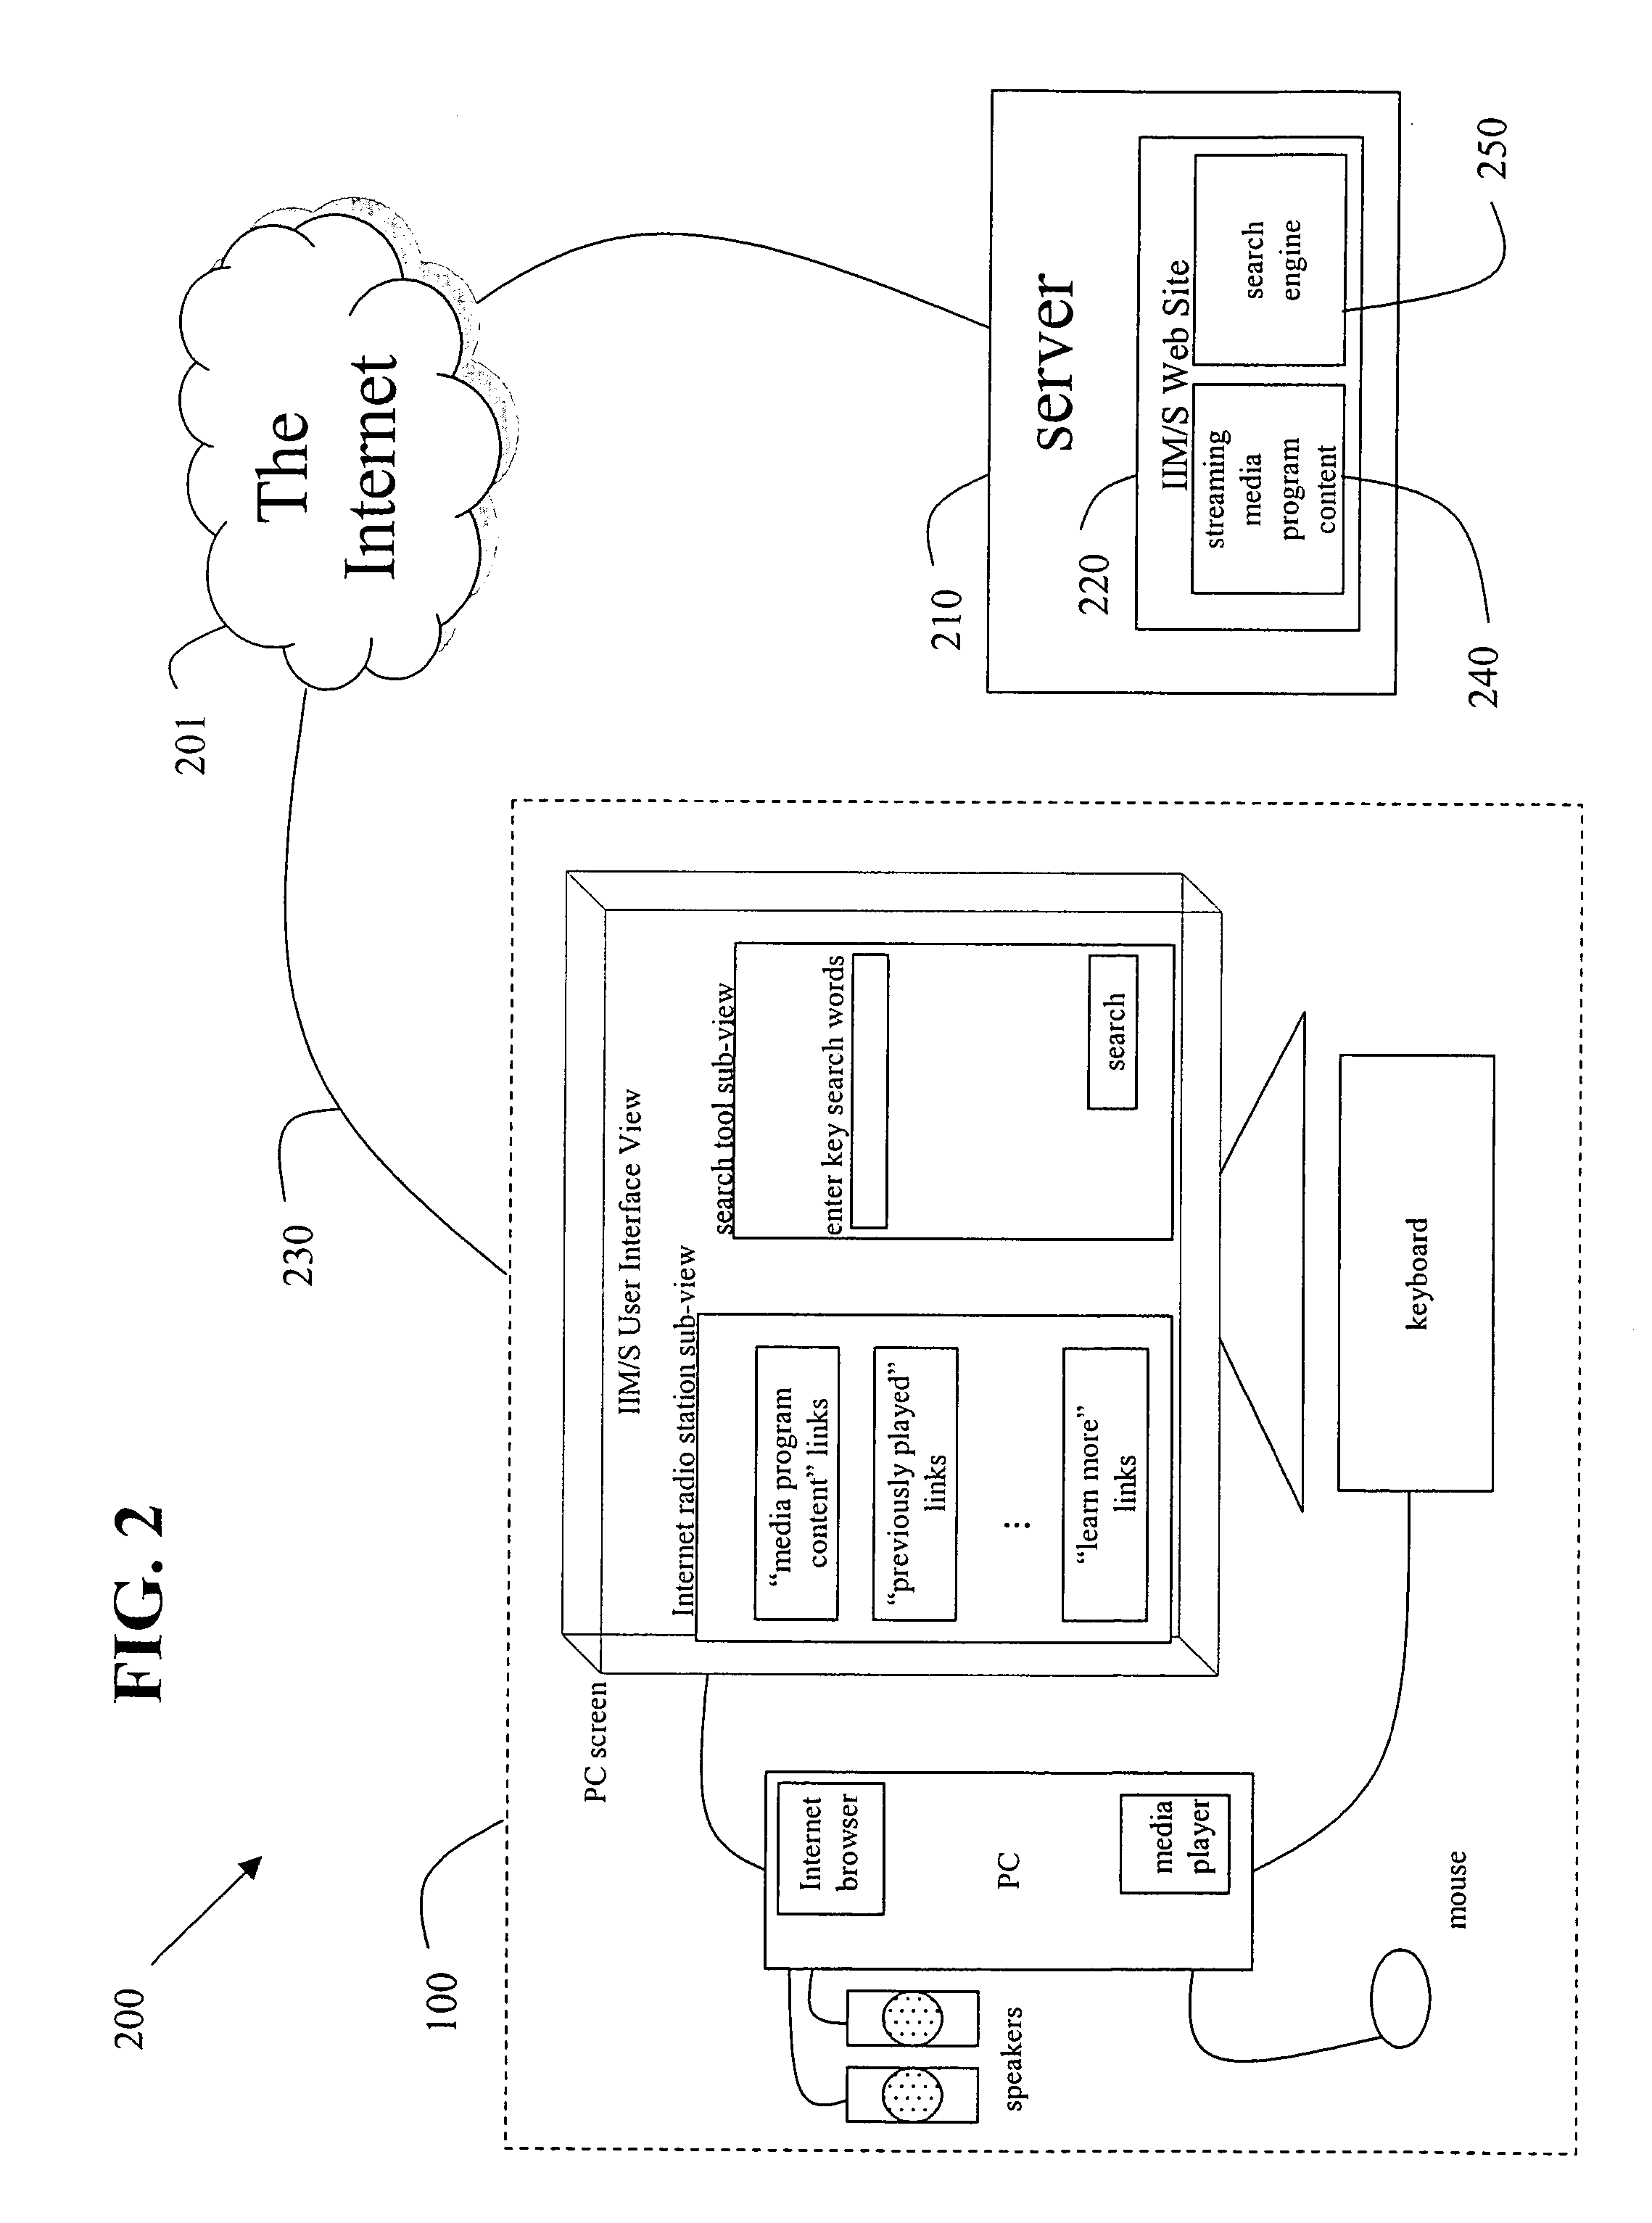 Methods to adapt search results provided by an integrated network-based media/search engine based on user lifestyle